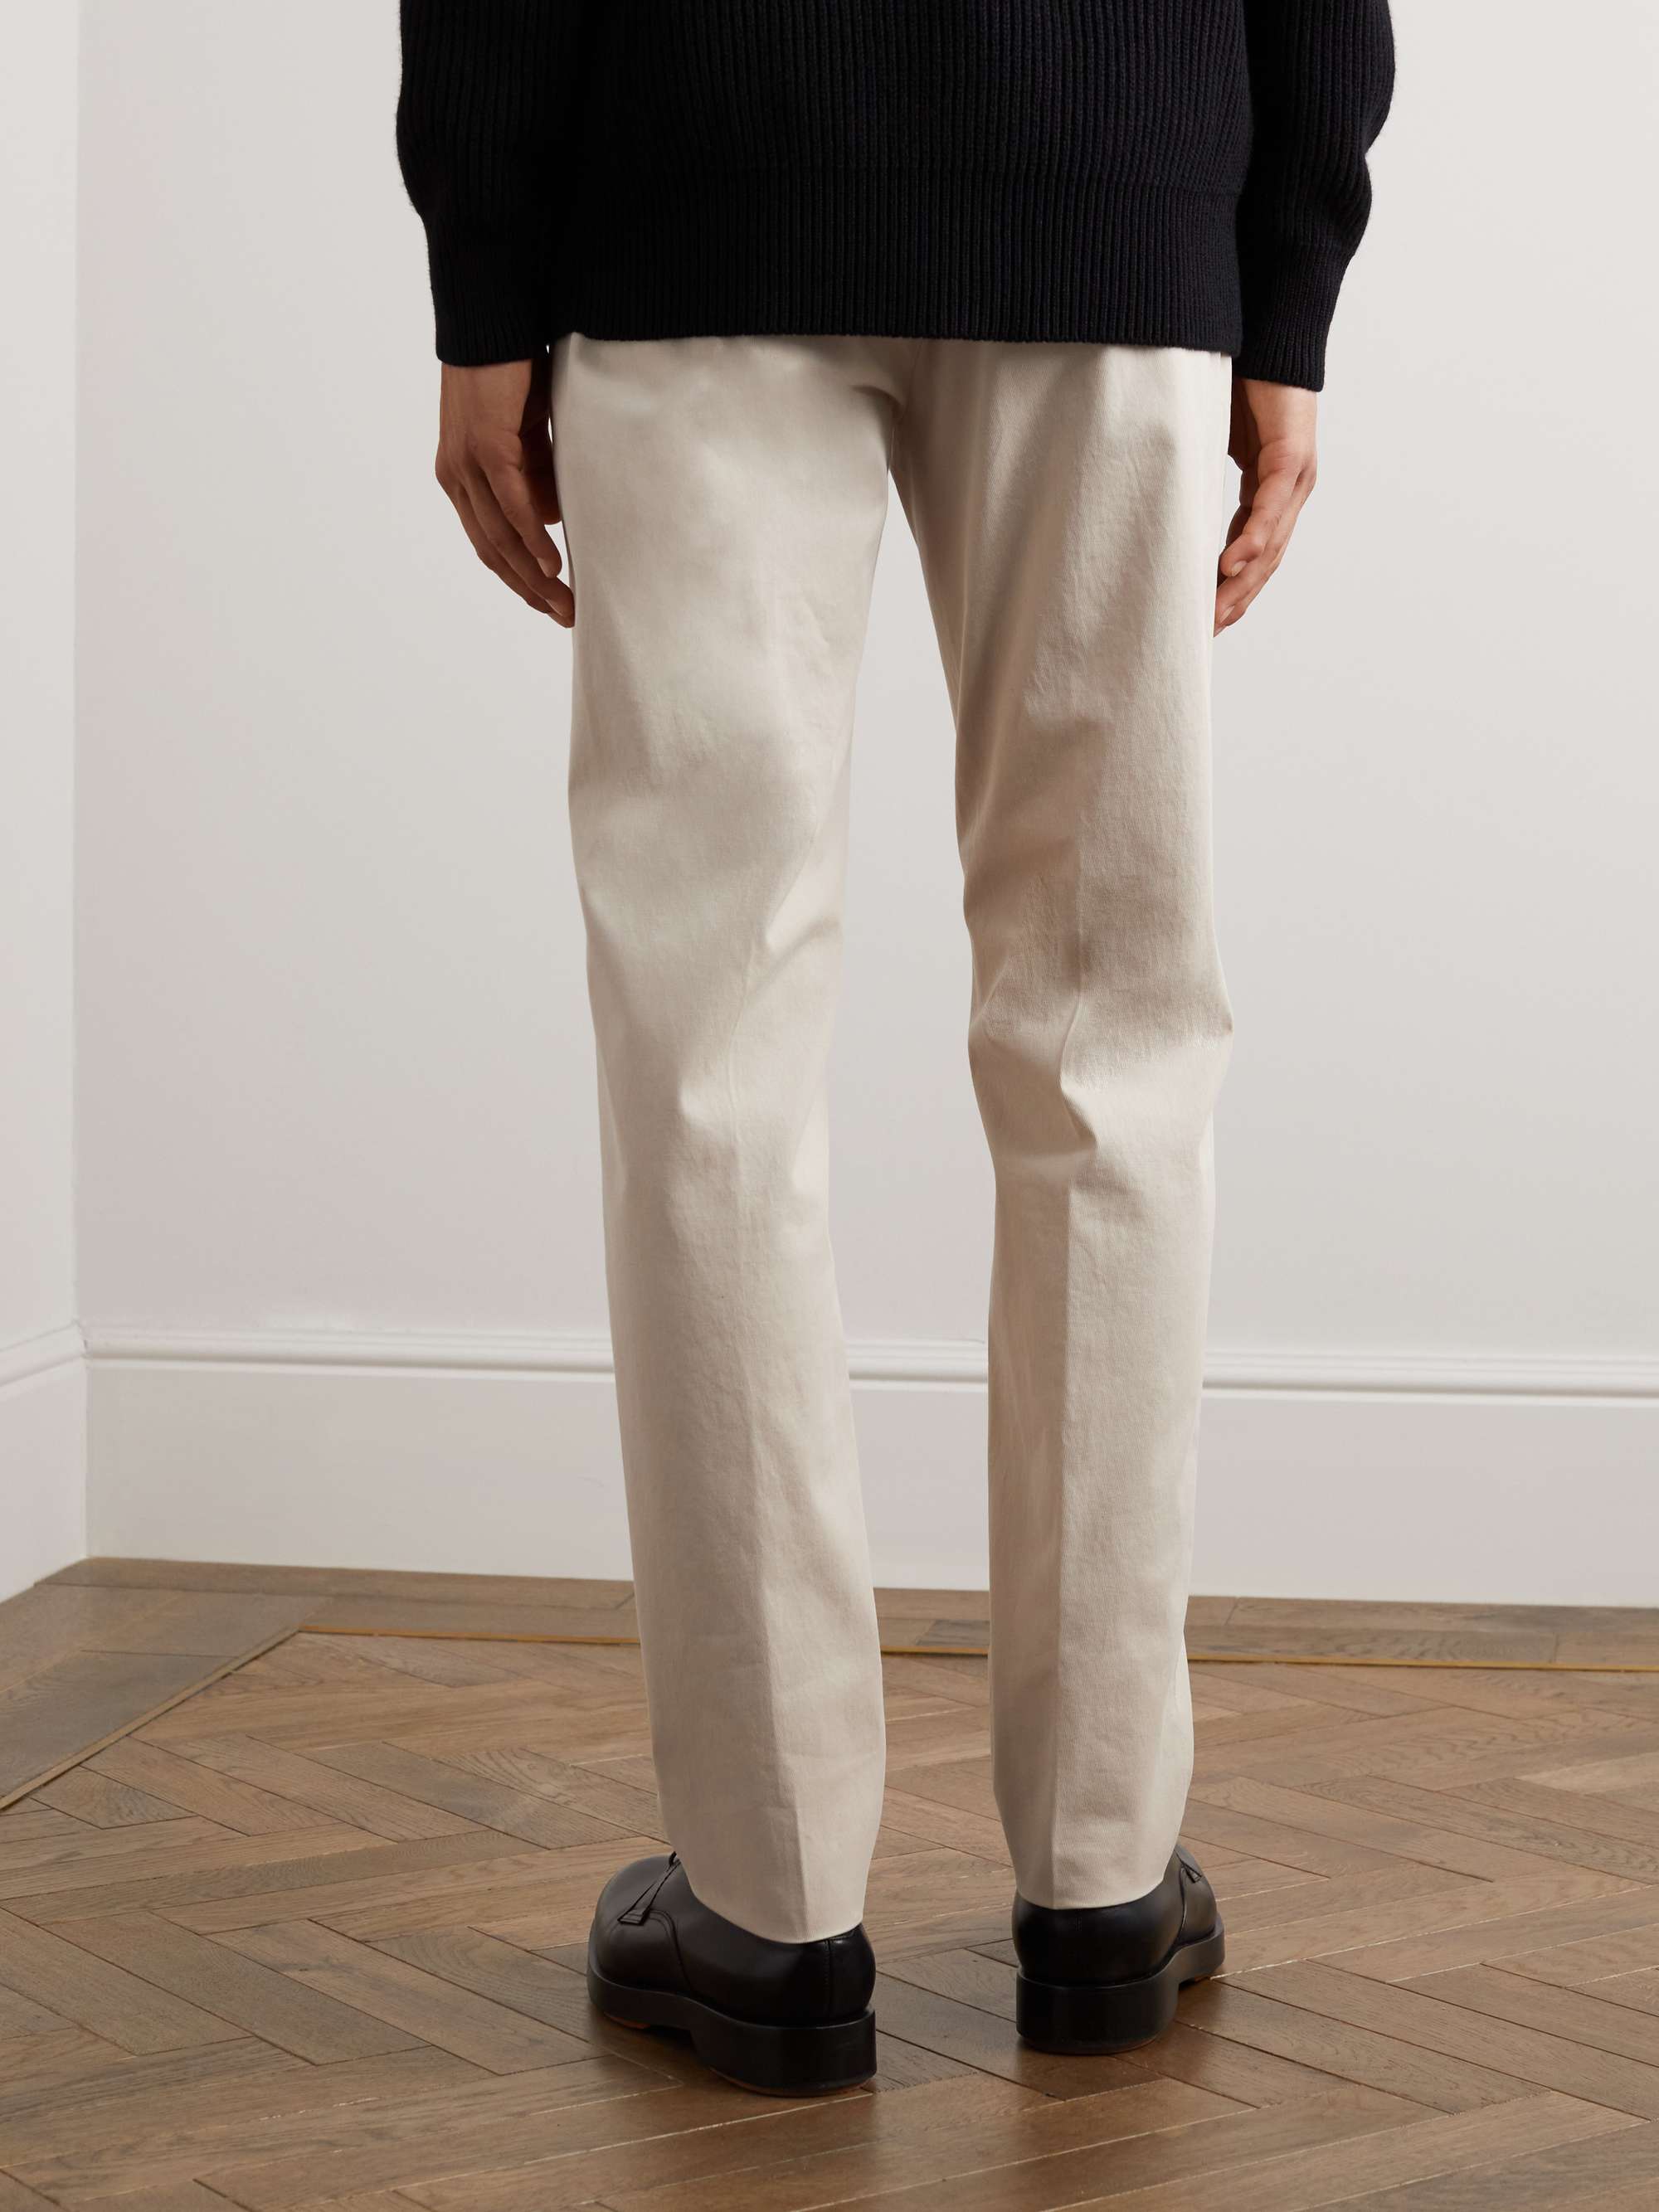 ZEGNA Slim-Fit Stretch-Cotton Twill Trousers